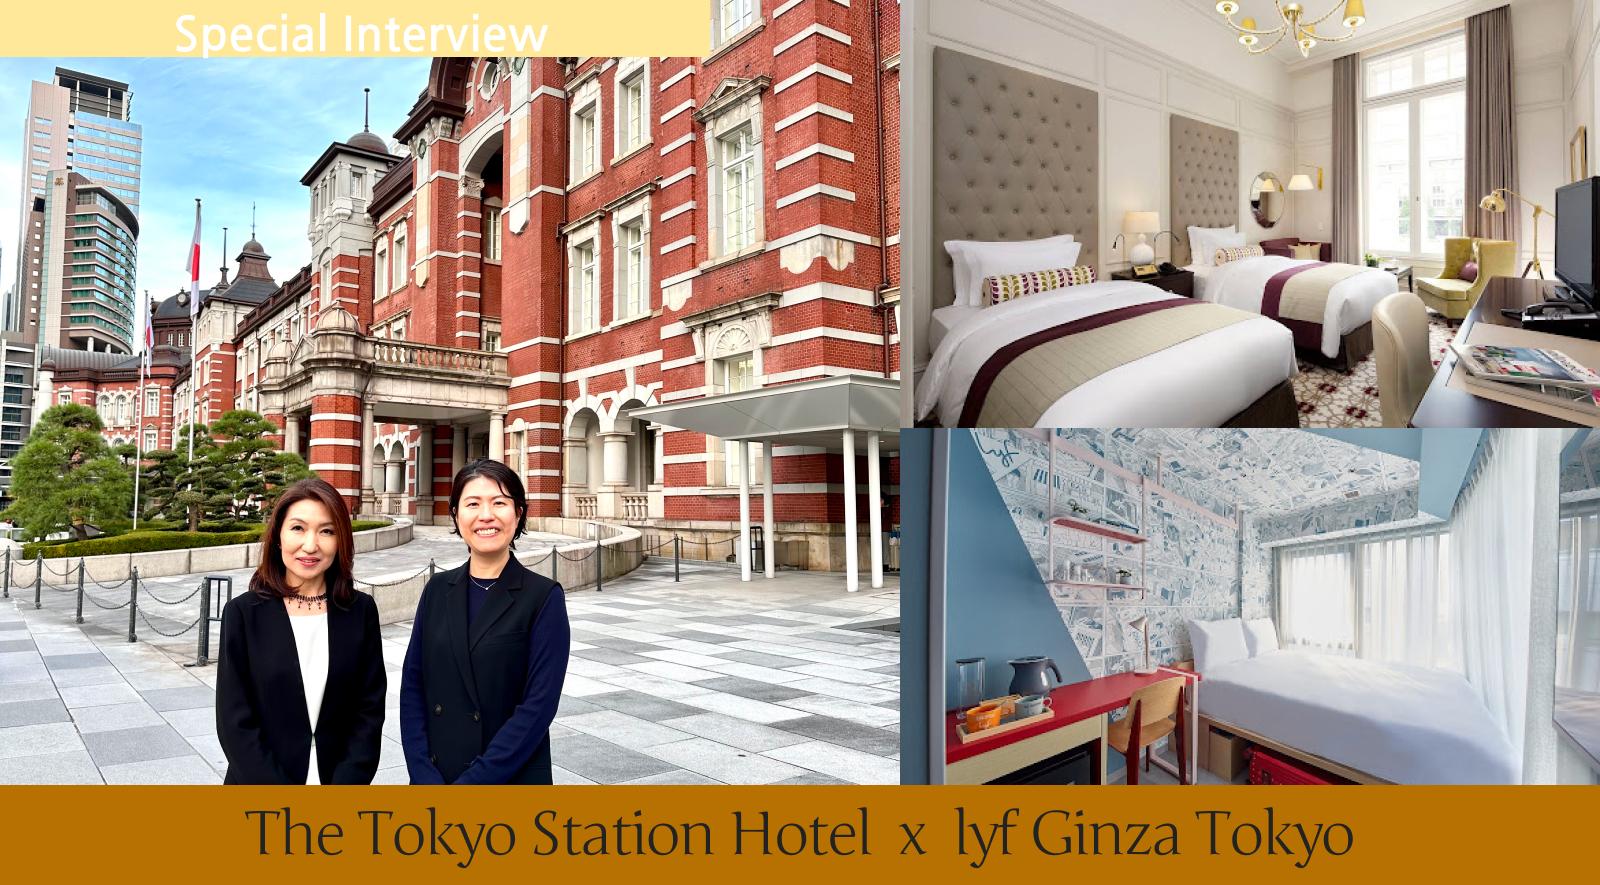 【Special Interview】         The Tokyo Station Hotel  x lyf Ginza Tokyo                       Talking about &#8220;Tokyo&#8221; hotels ranked in the top 10 of &#8220;The World&#8217;s Best Cities&#8221; 2024